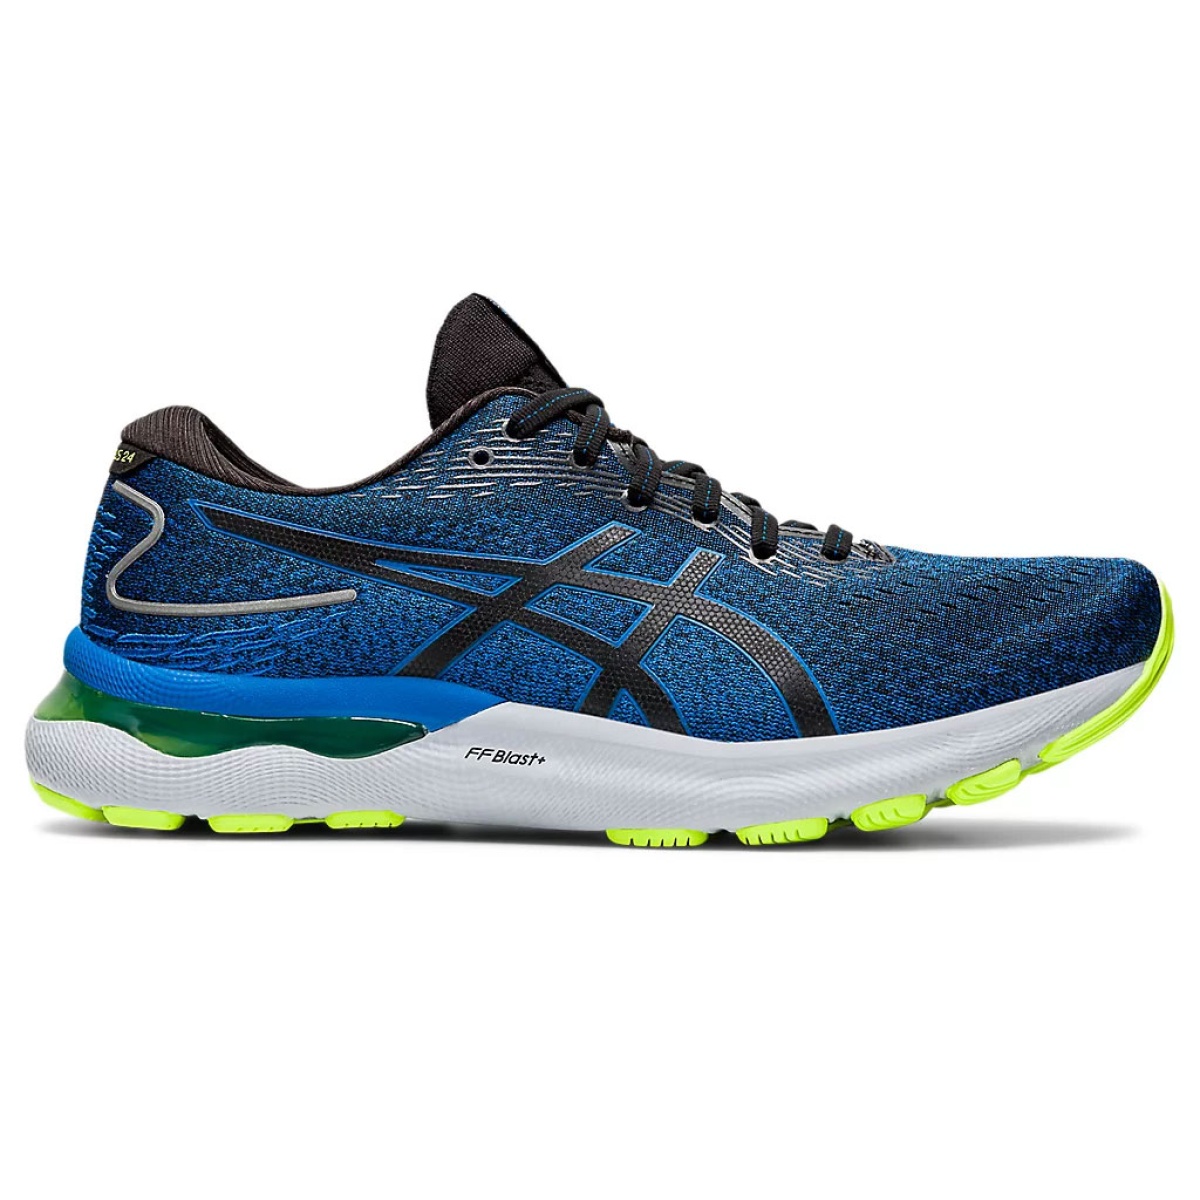 Buy Asics Gel Nimbus 24 Mens Running Shoes @ Lowest Prices - Sportsuncle